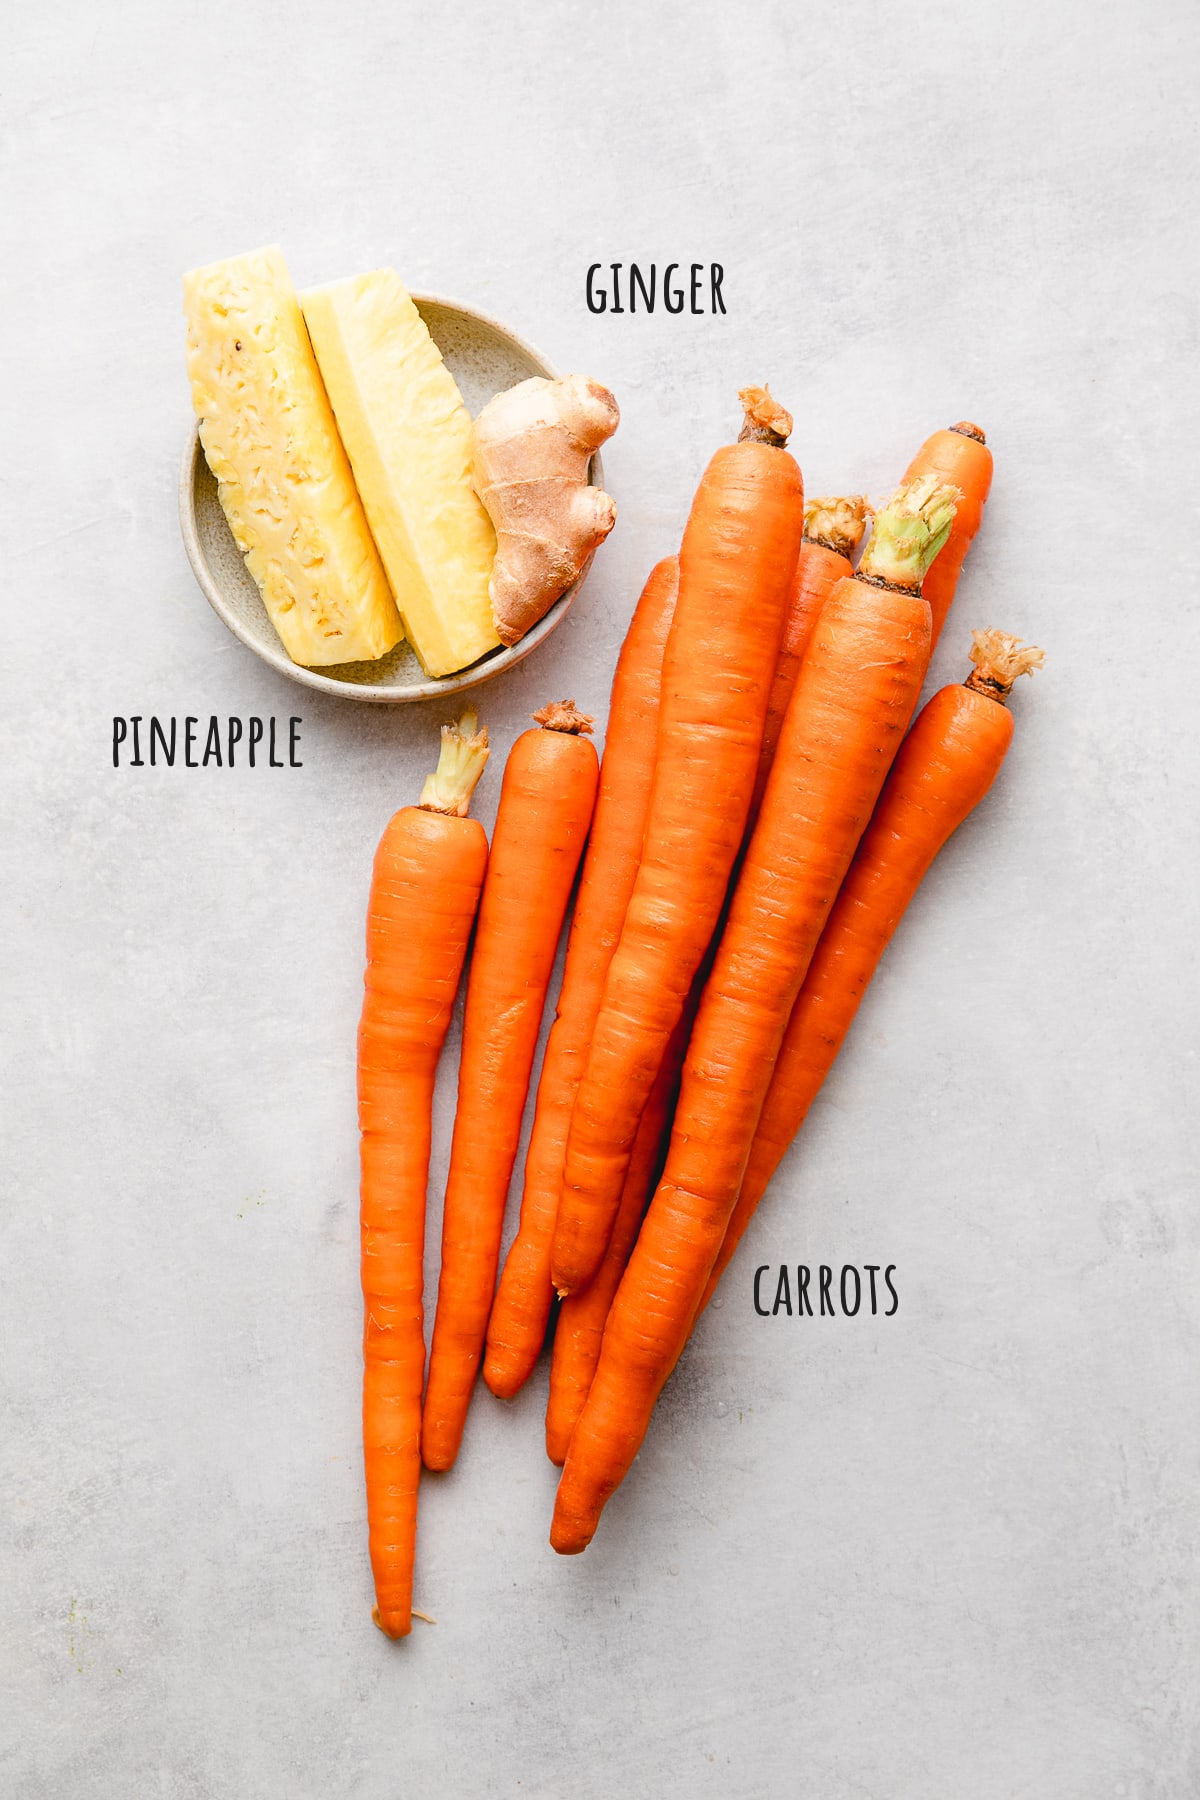 top down view of ingredients used to make carrot juice with pineapple and giner.